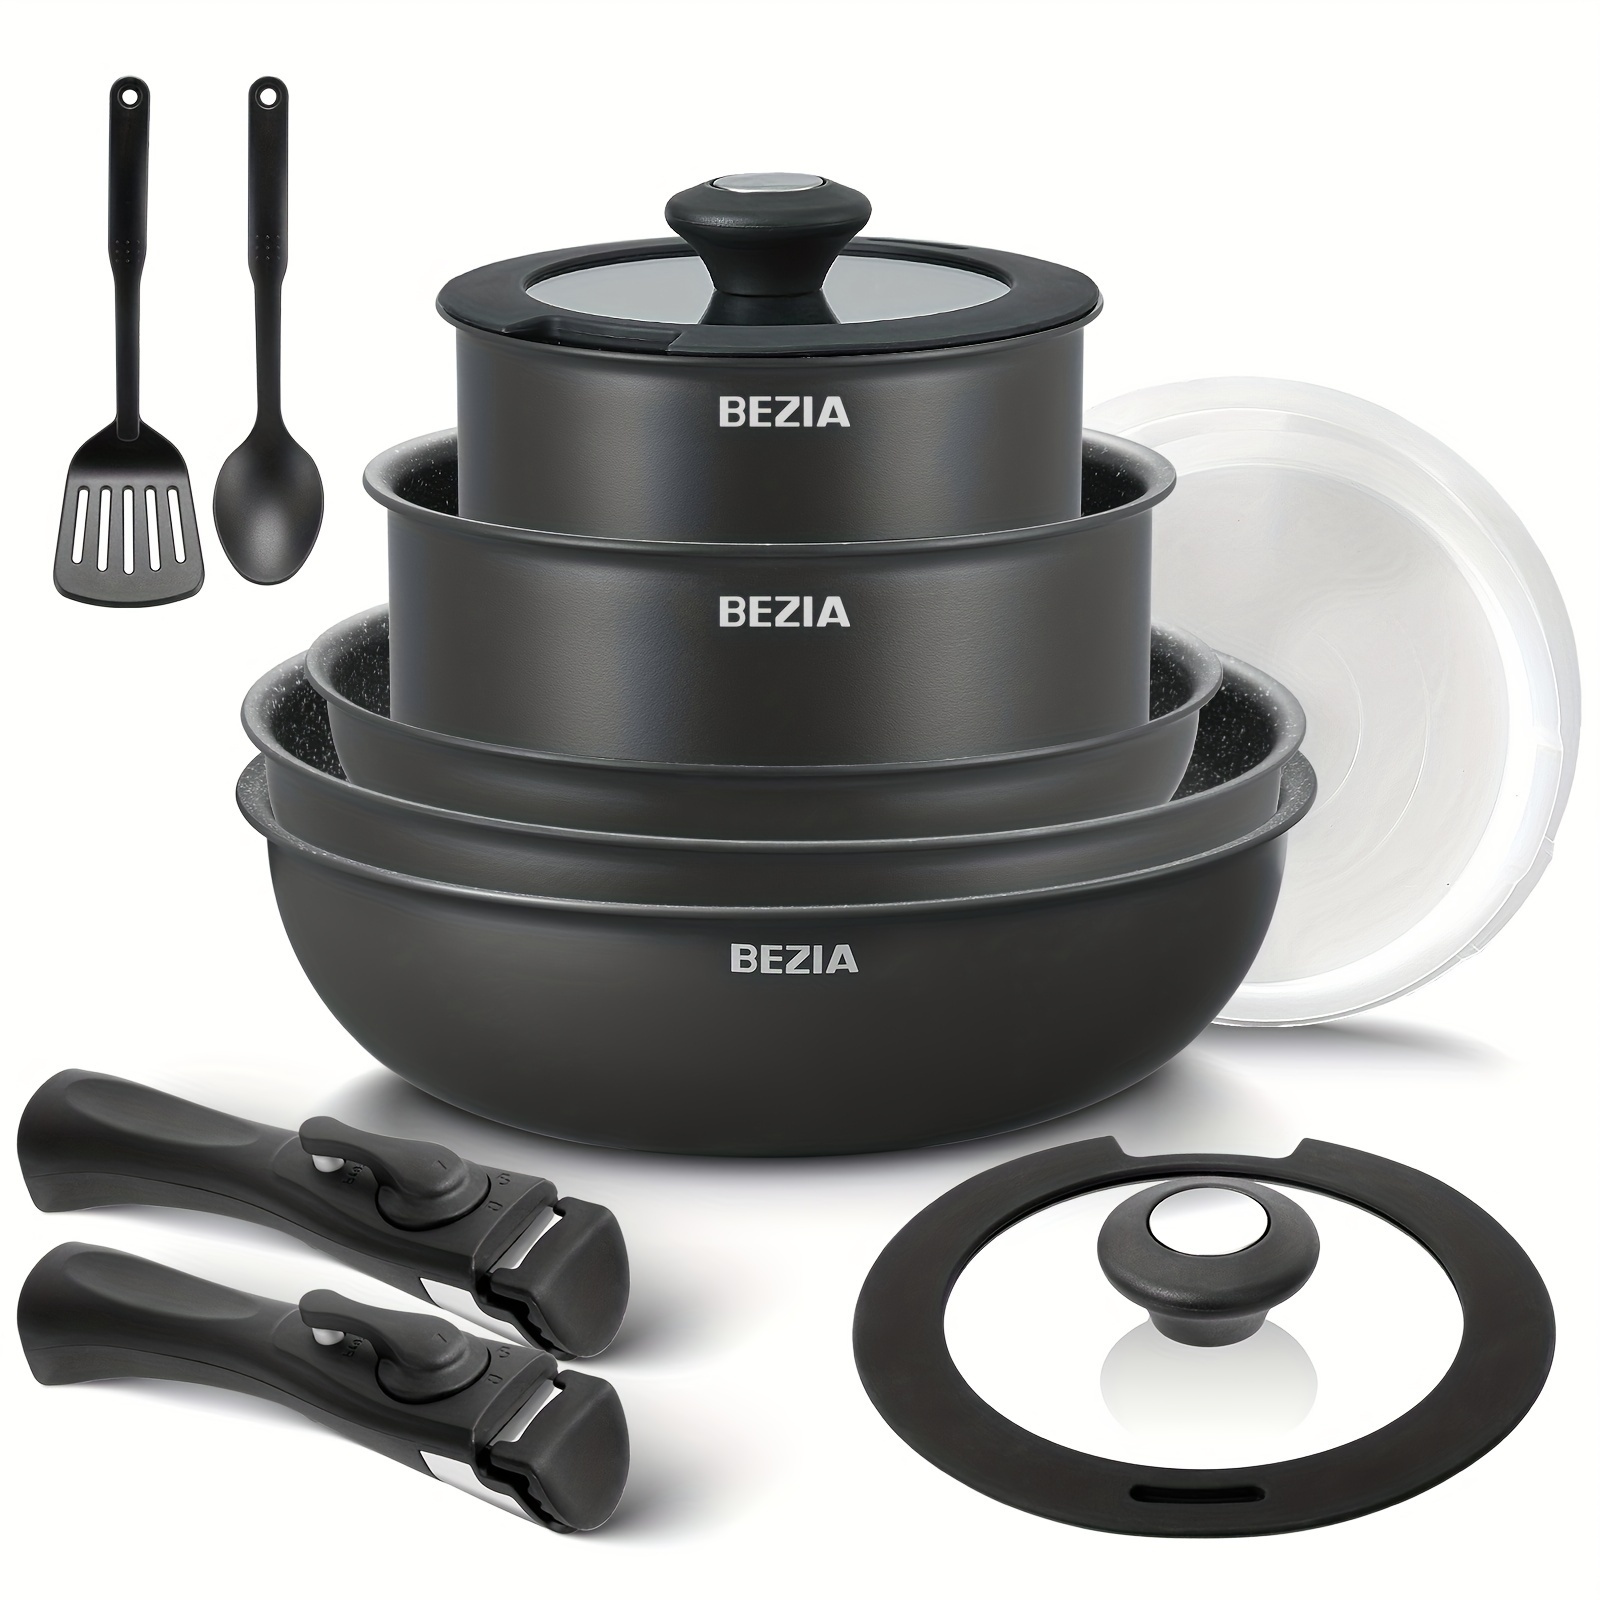 

13pcs, Induction Cookware Set, Nonstick Aluminum Pots And Pans With Removable Handles, All Hobs Compatible, Stackable, Dishwasher/oven Safe, Pfas Free, With Silicone Lids & Cooking Utensils